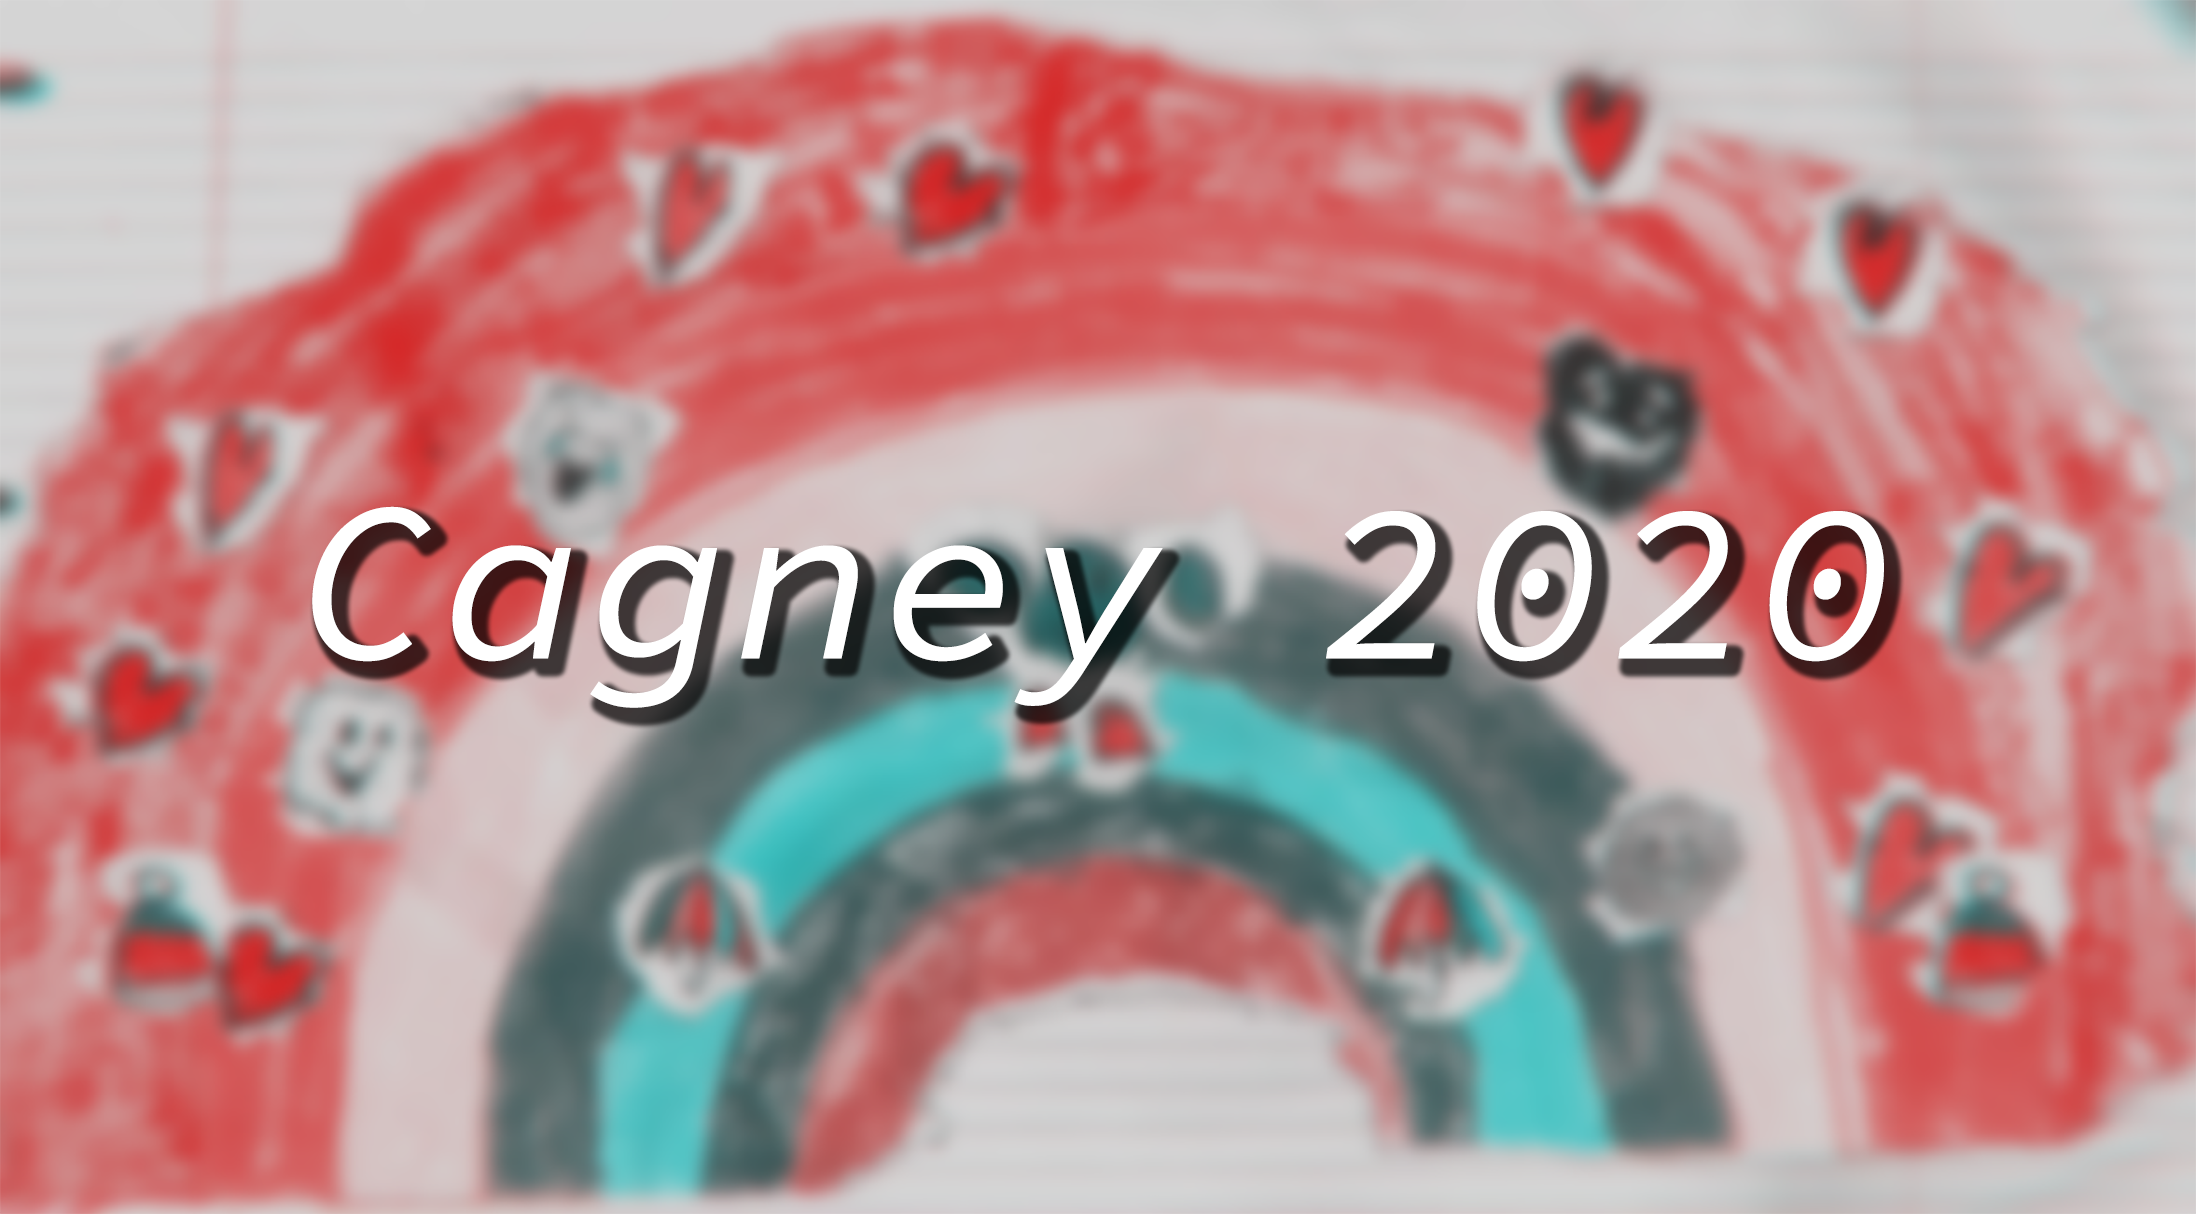 Cagney 2020